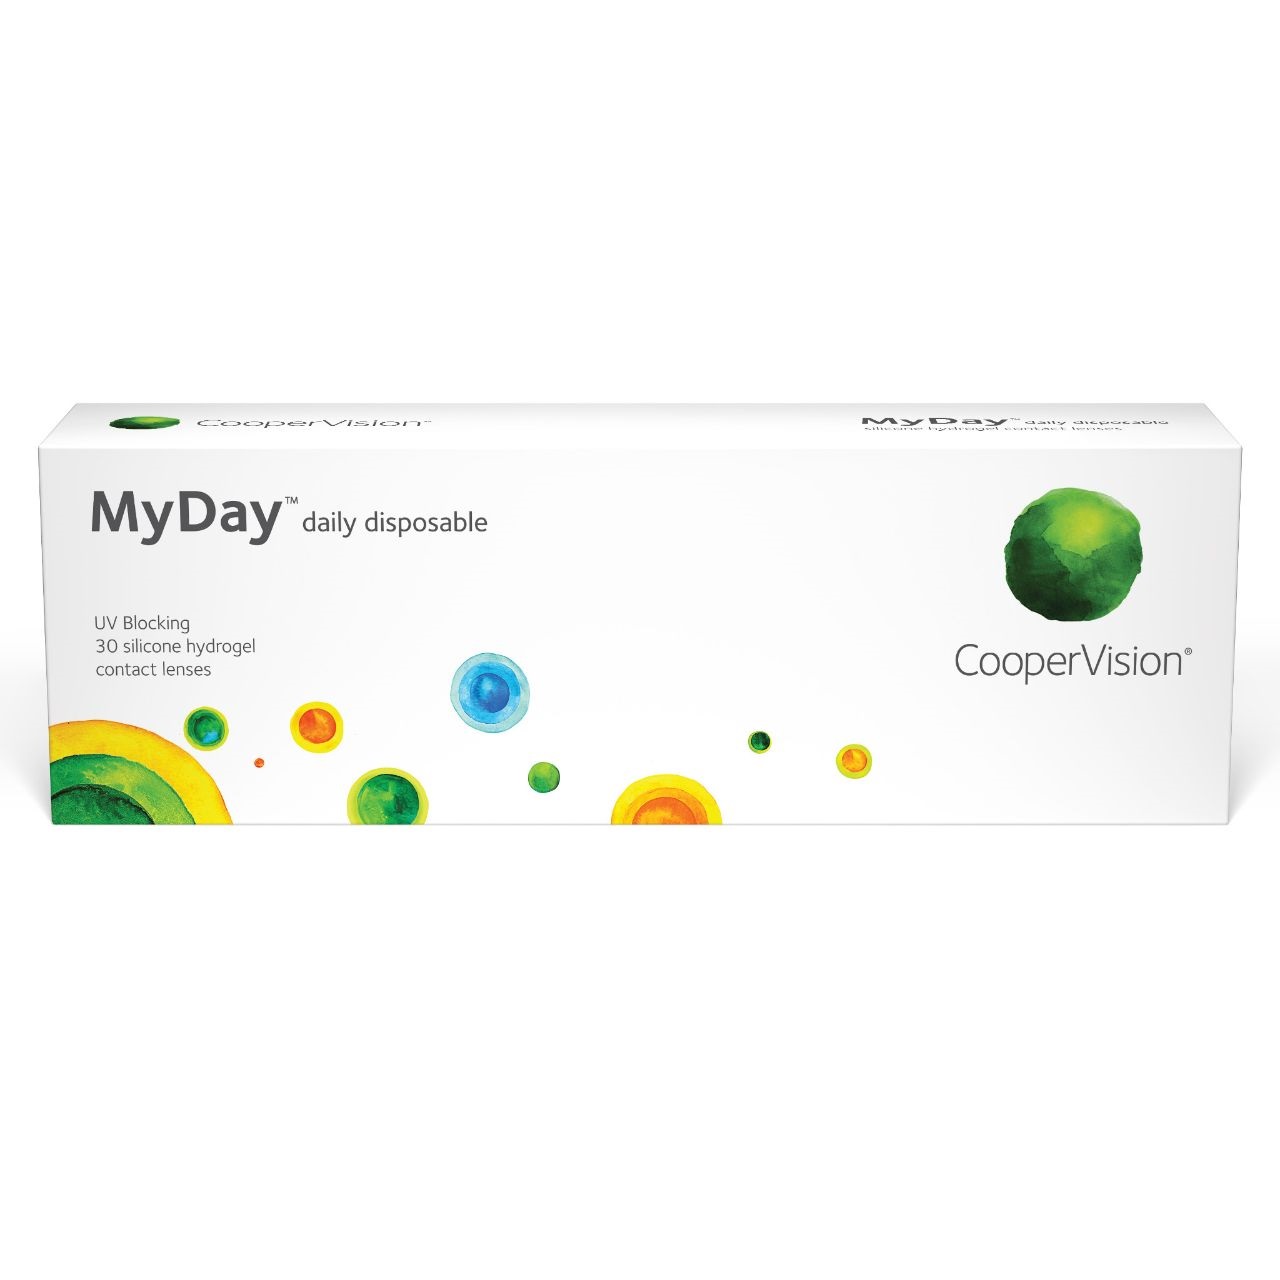 Day we contact. COOPERVISION MYDAY Toric (30 линз). Cooper Vision my Day Toric линзы. Cooper Vision линзы 1 Day Silicone Hydrogel. MYDAY контактные линзы Cooper Vision Daily Disposable.